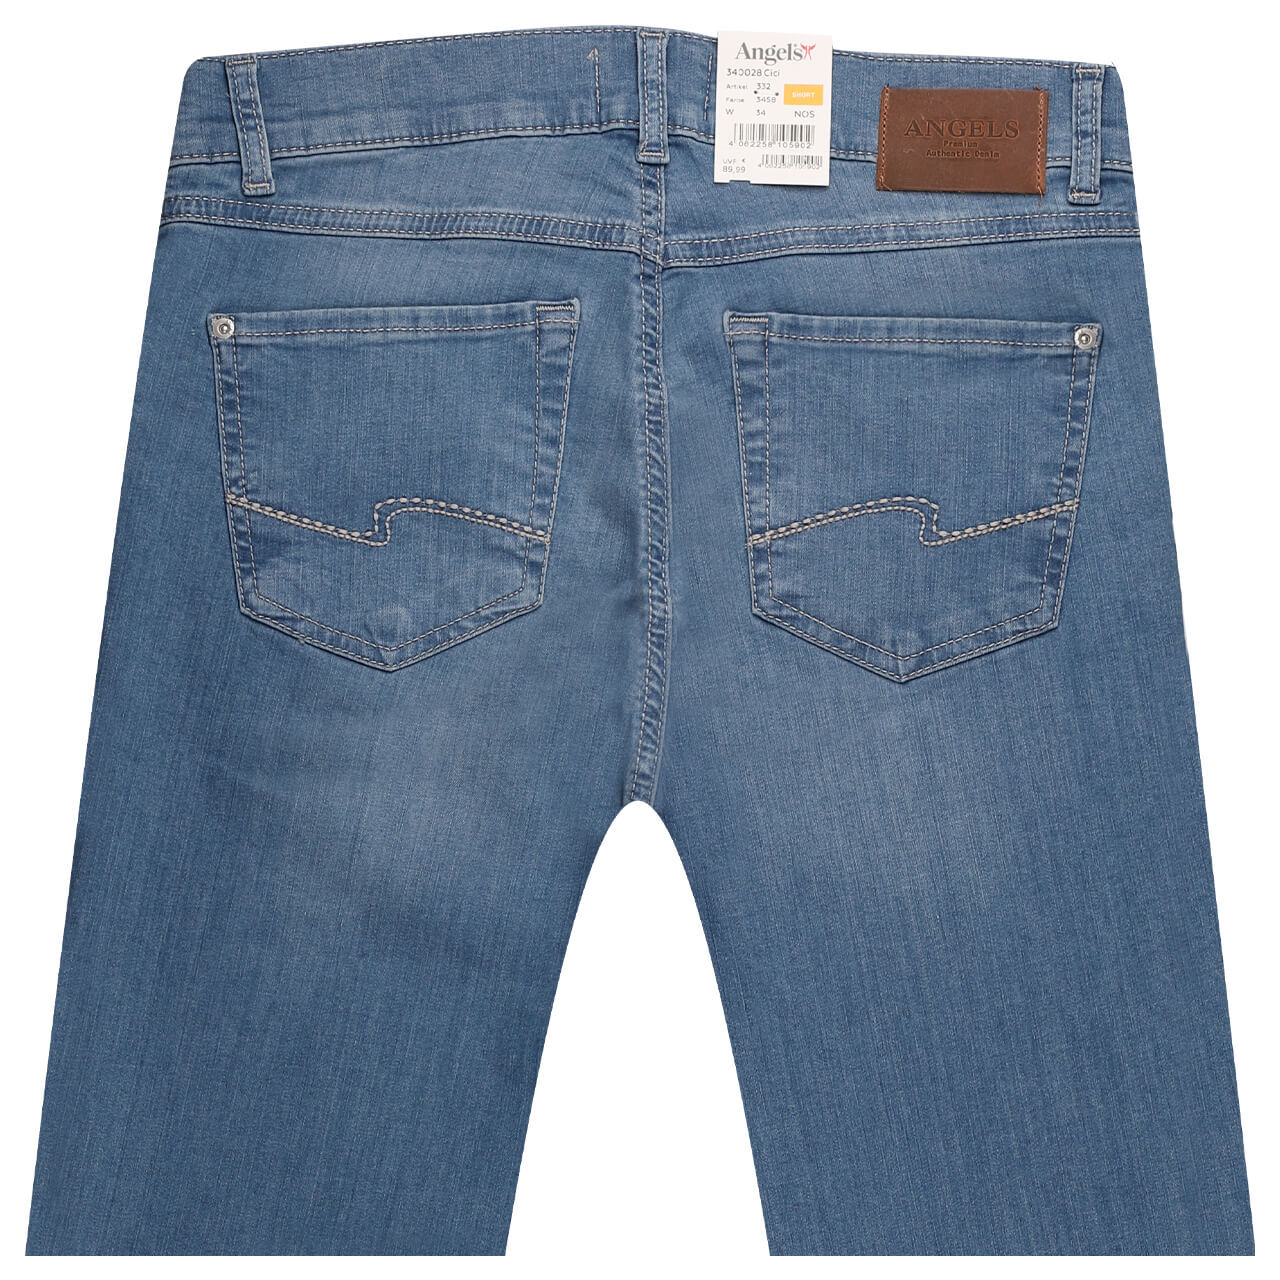 Angels Cici Jeans ferra blue used